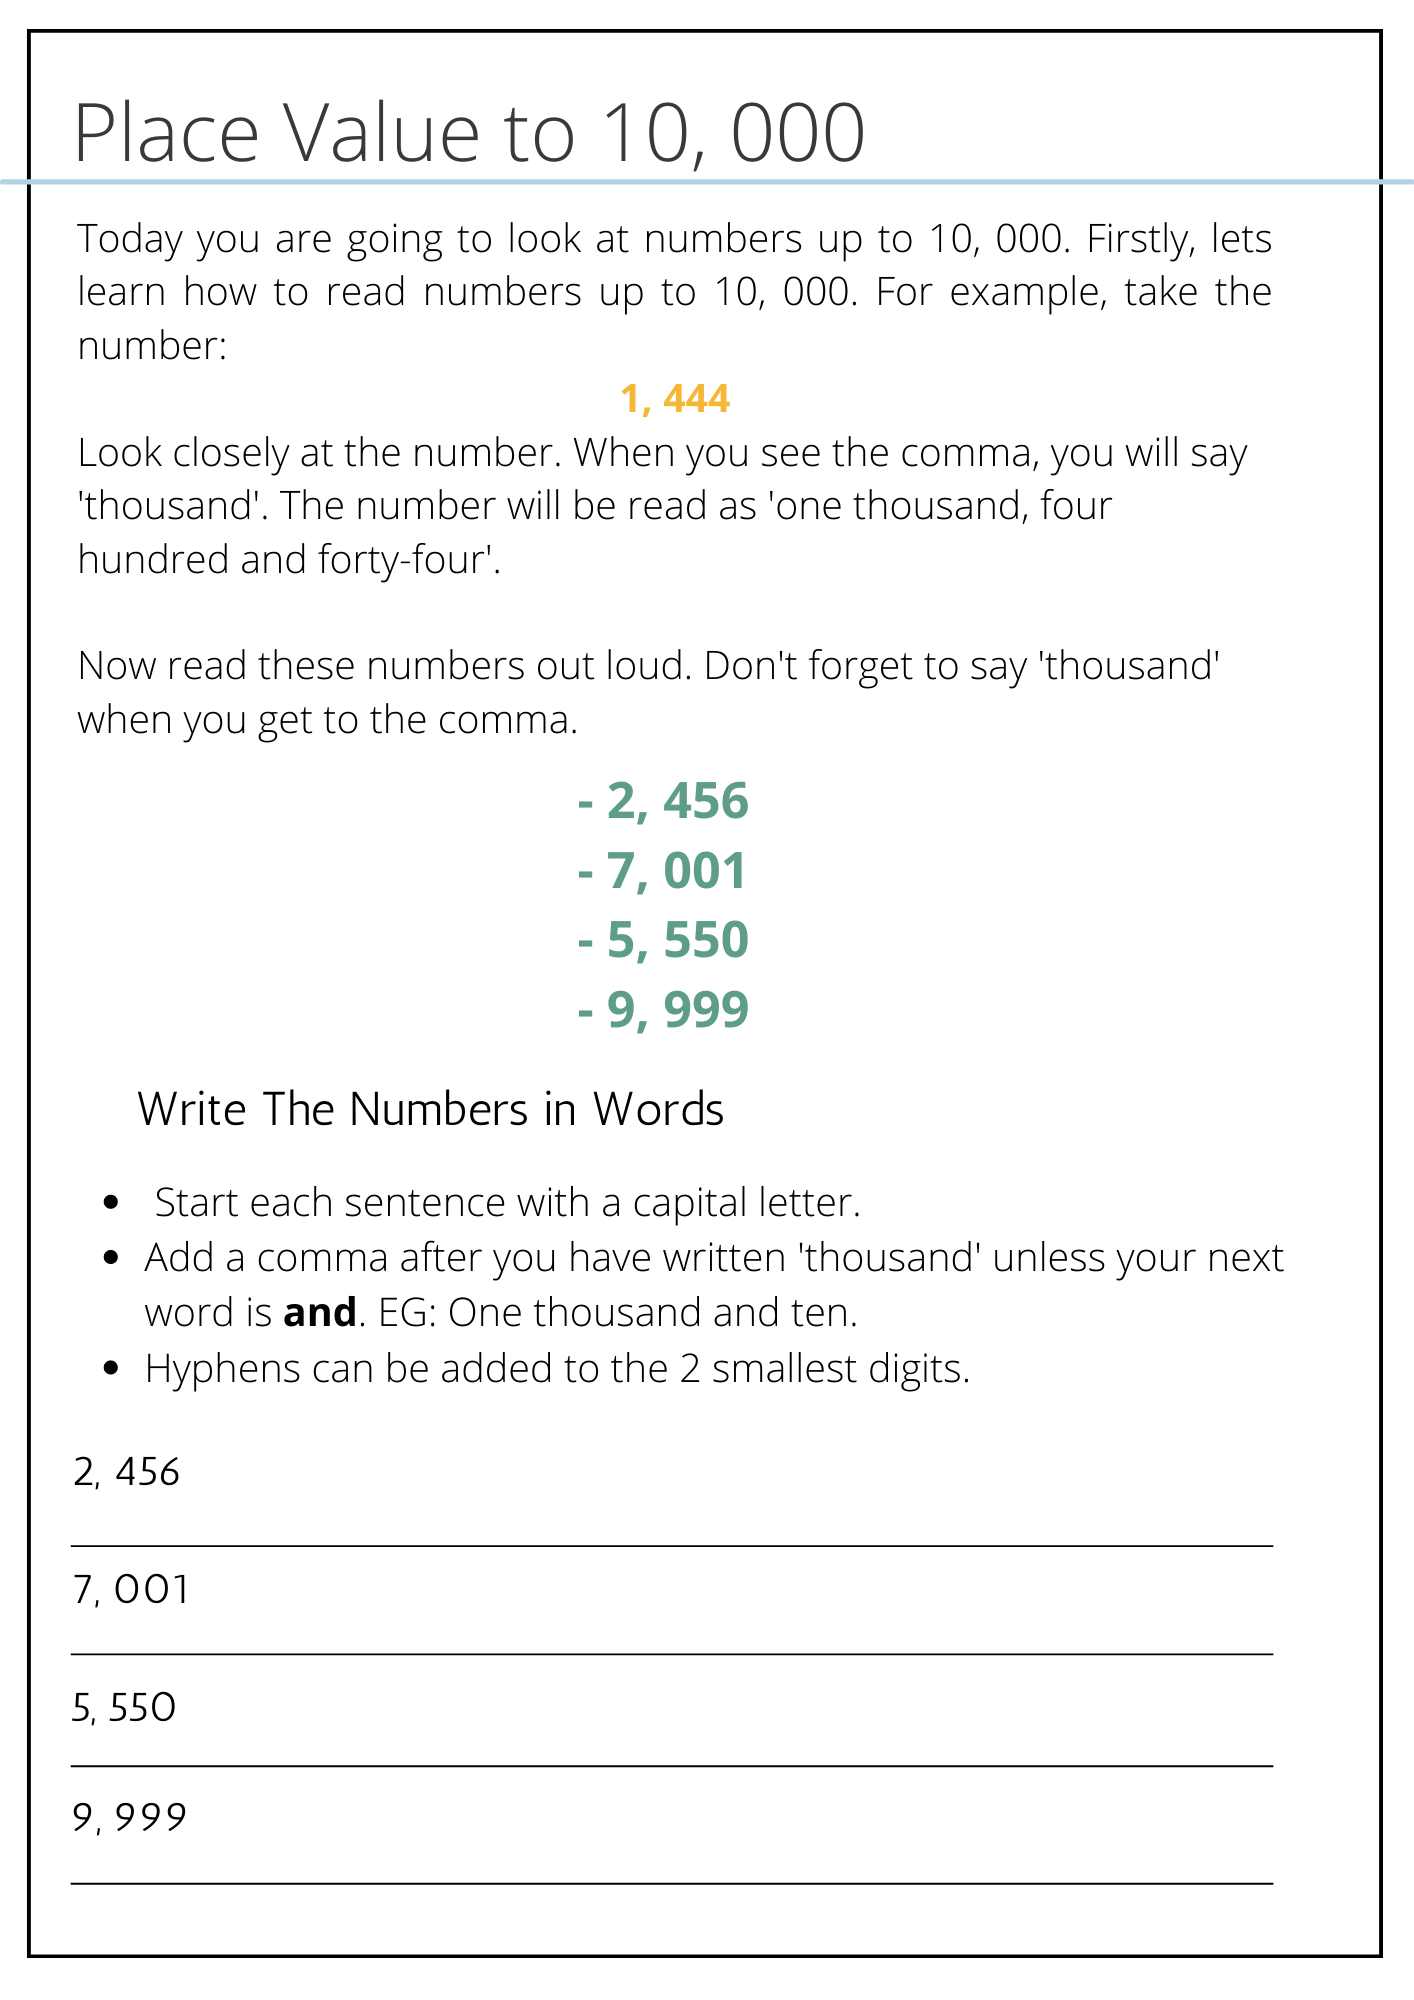 Place Value Resource Pack - Grades 3 - 4